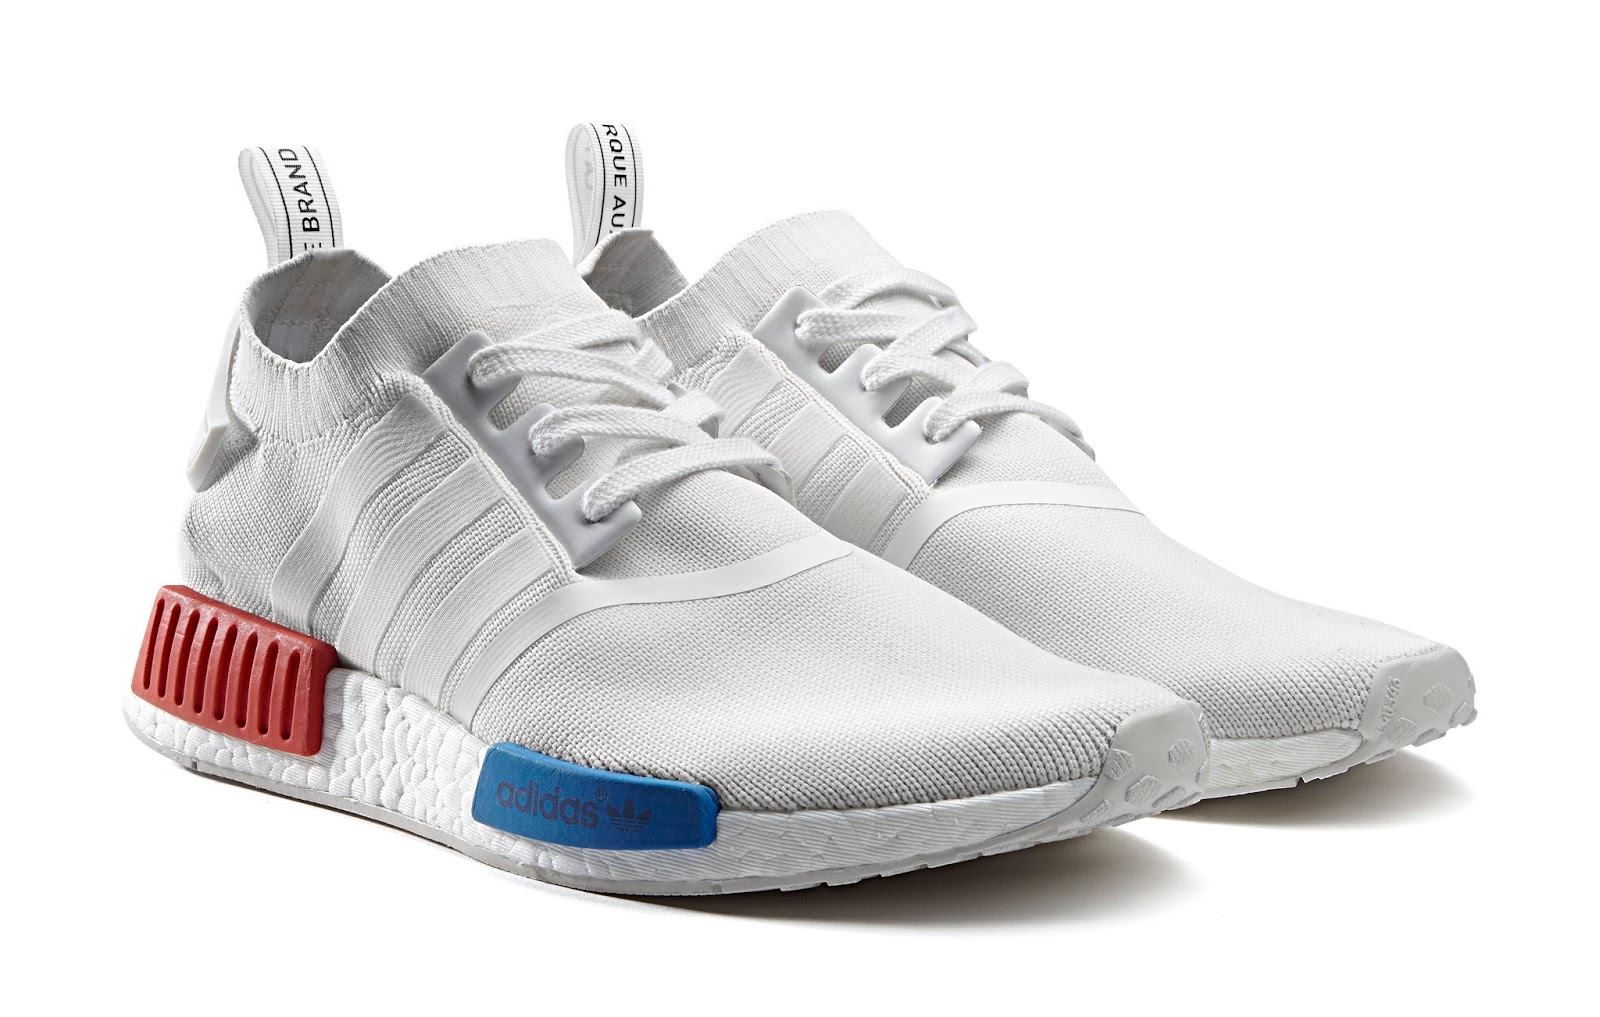 adidas NMD May 2016 Release in Kuala Lumpur - A V E R A G E JANE